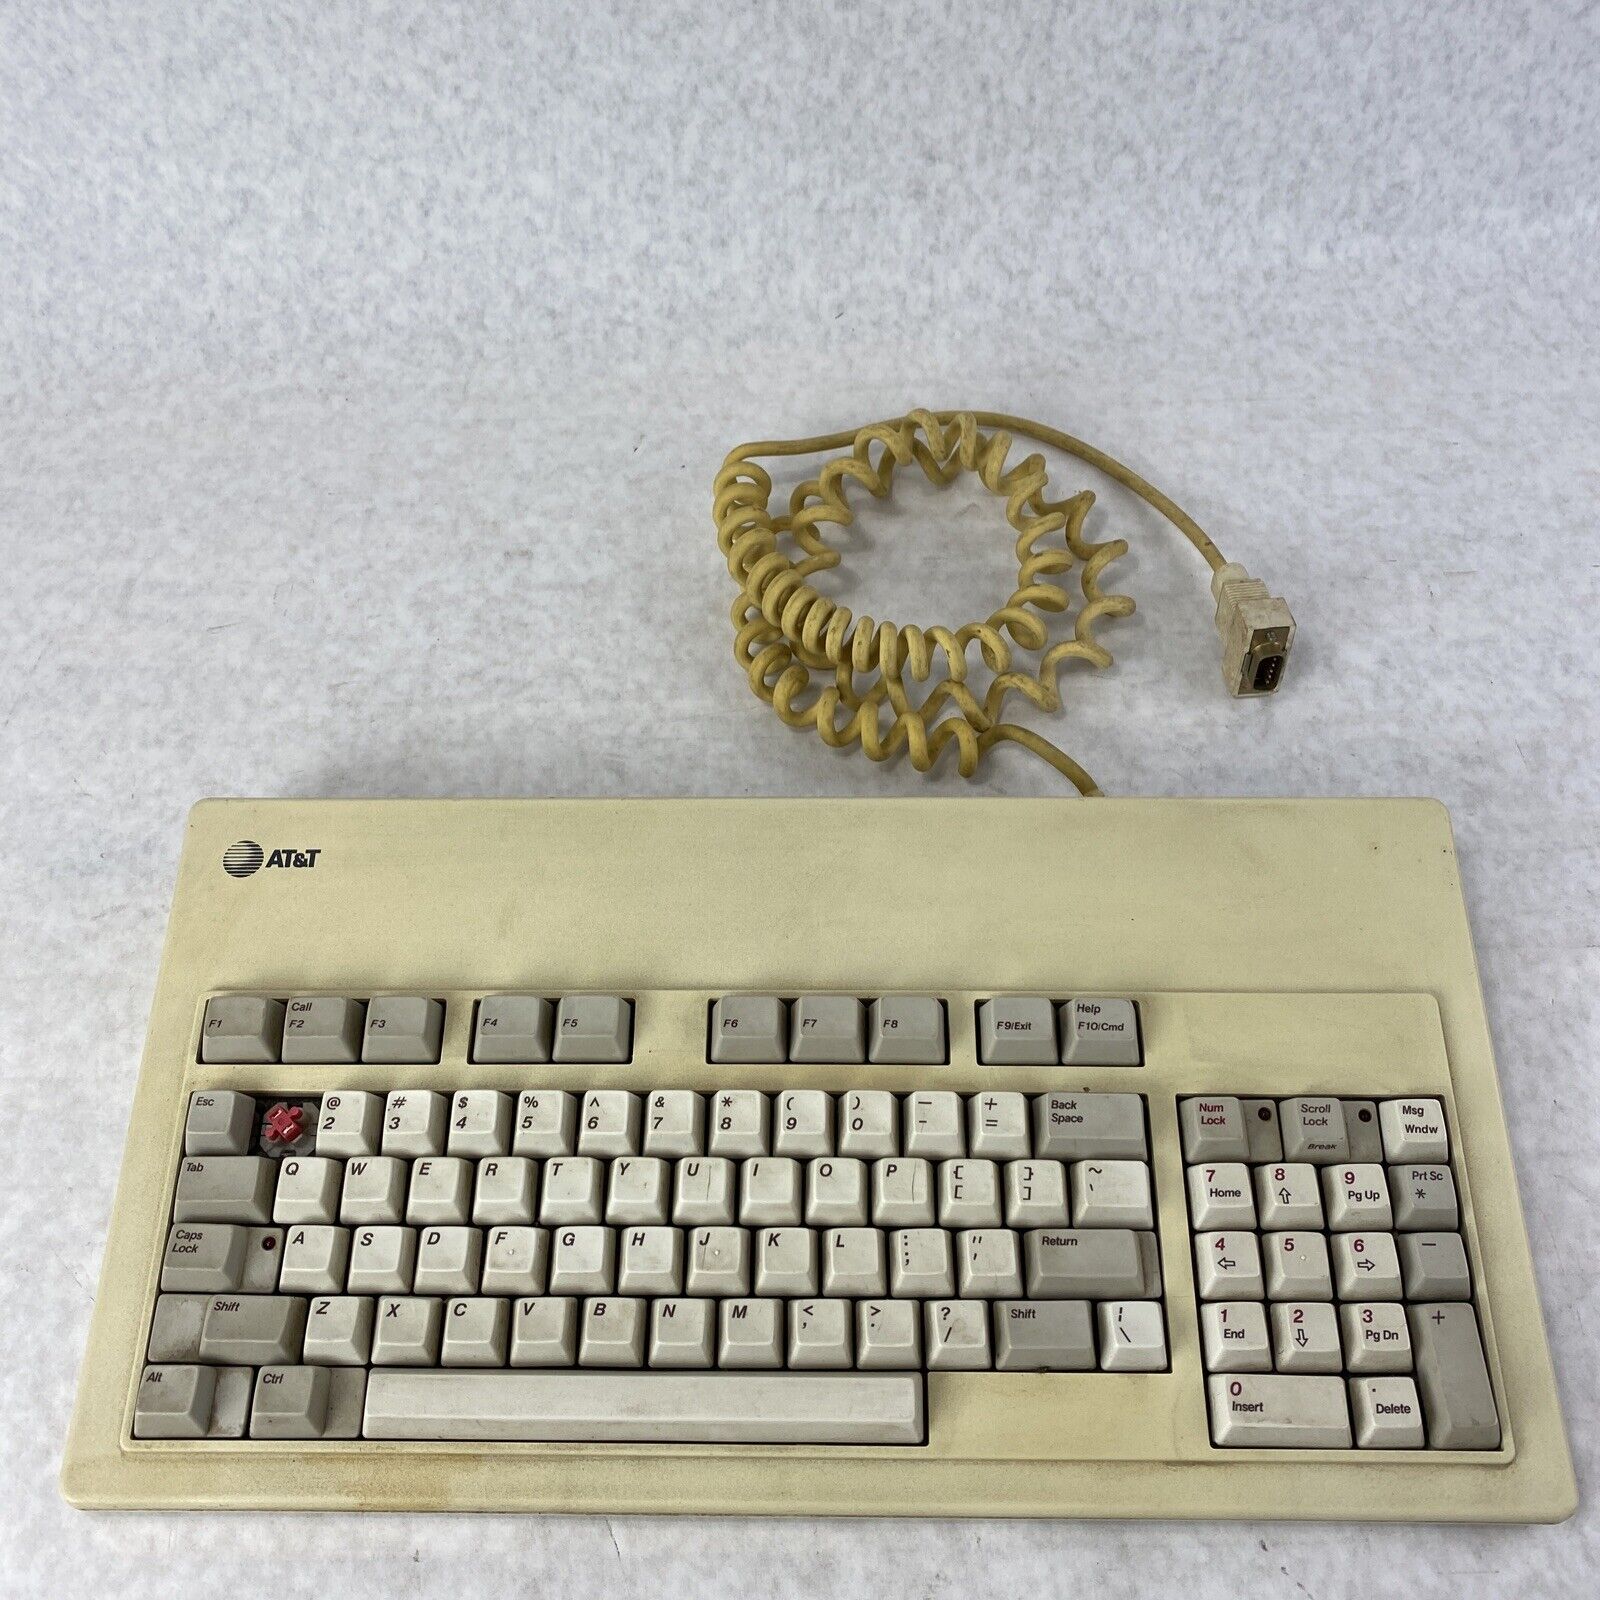 AT&T KBD 302 Mechanical Keyboard w/o [ 1 ] 5pin Vintage Made in Italy from WGS